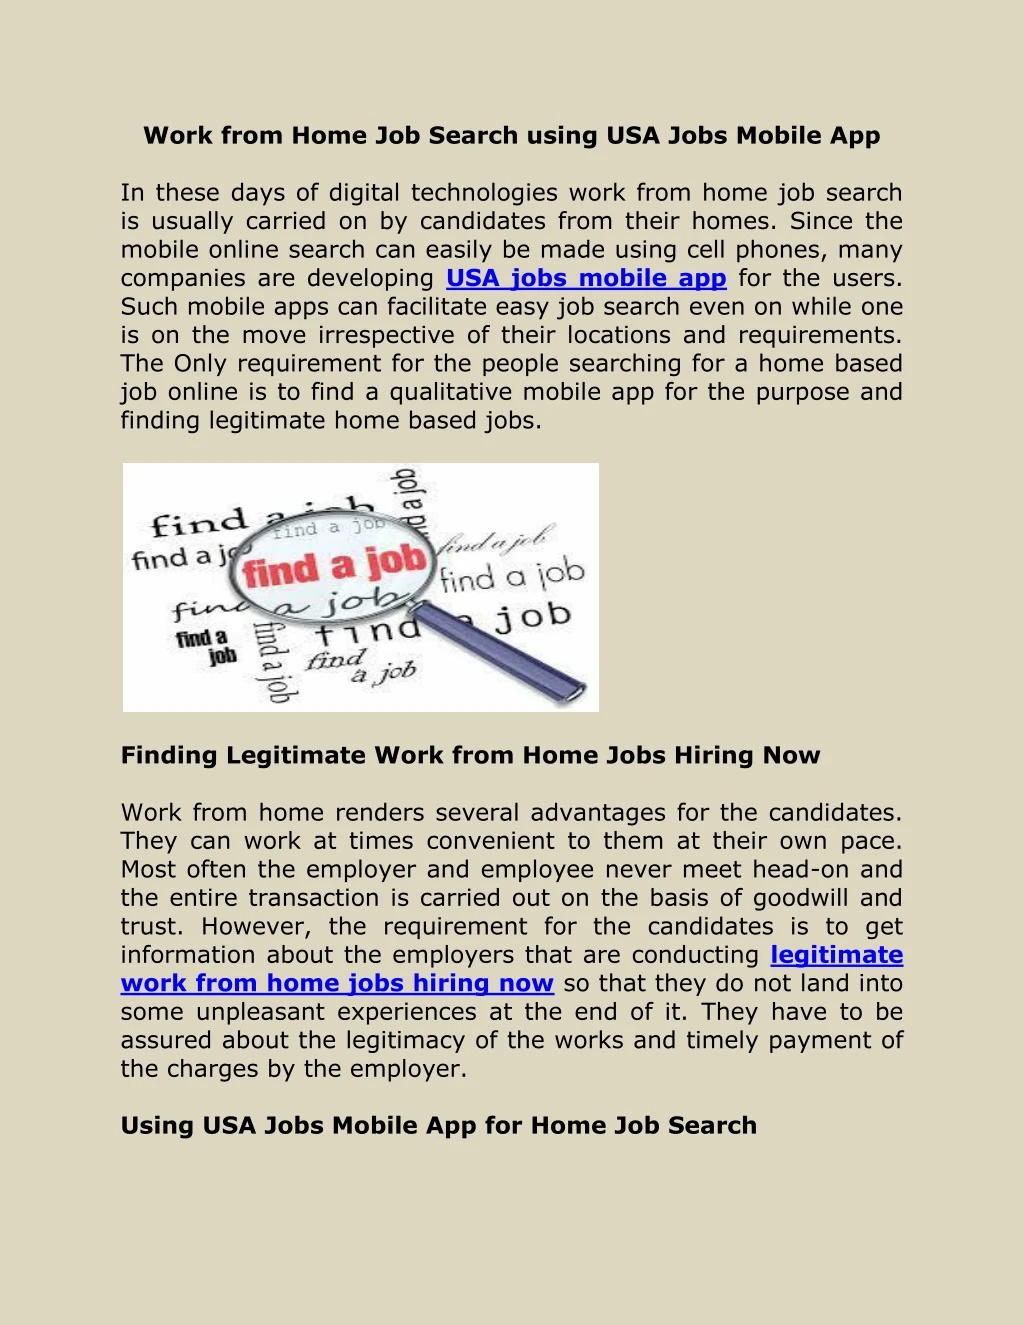 work from home job search using usa jobs mobile